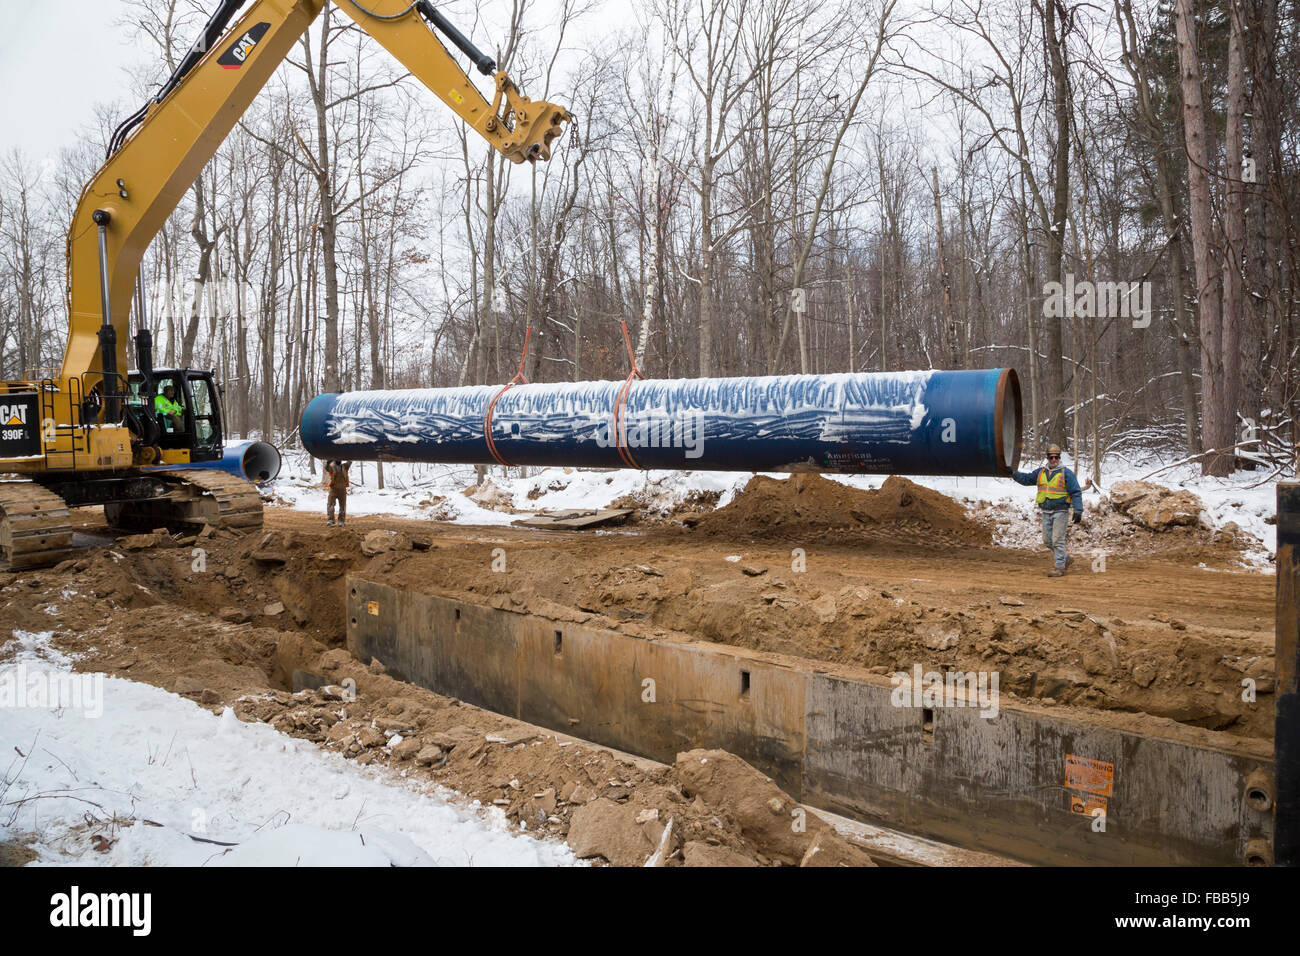 Columbiaville, Michigan USA - 13th January 2016 - Construction of a water pipeline for Flint, Michigan and surrounding areas. The pipeline will take water from Lake Huron through a 70-mile pipeline. Flint's decision to draw its water from the Flint River until construction is complete--instead of continuing to buy it from Detroit--has led to elevated levels of lead in Flint children. Credit:  Jim West/Alamy Live News Stock Photo